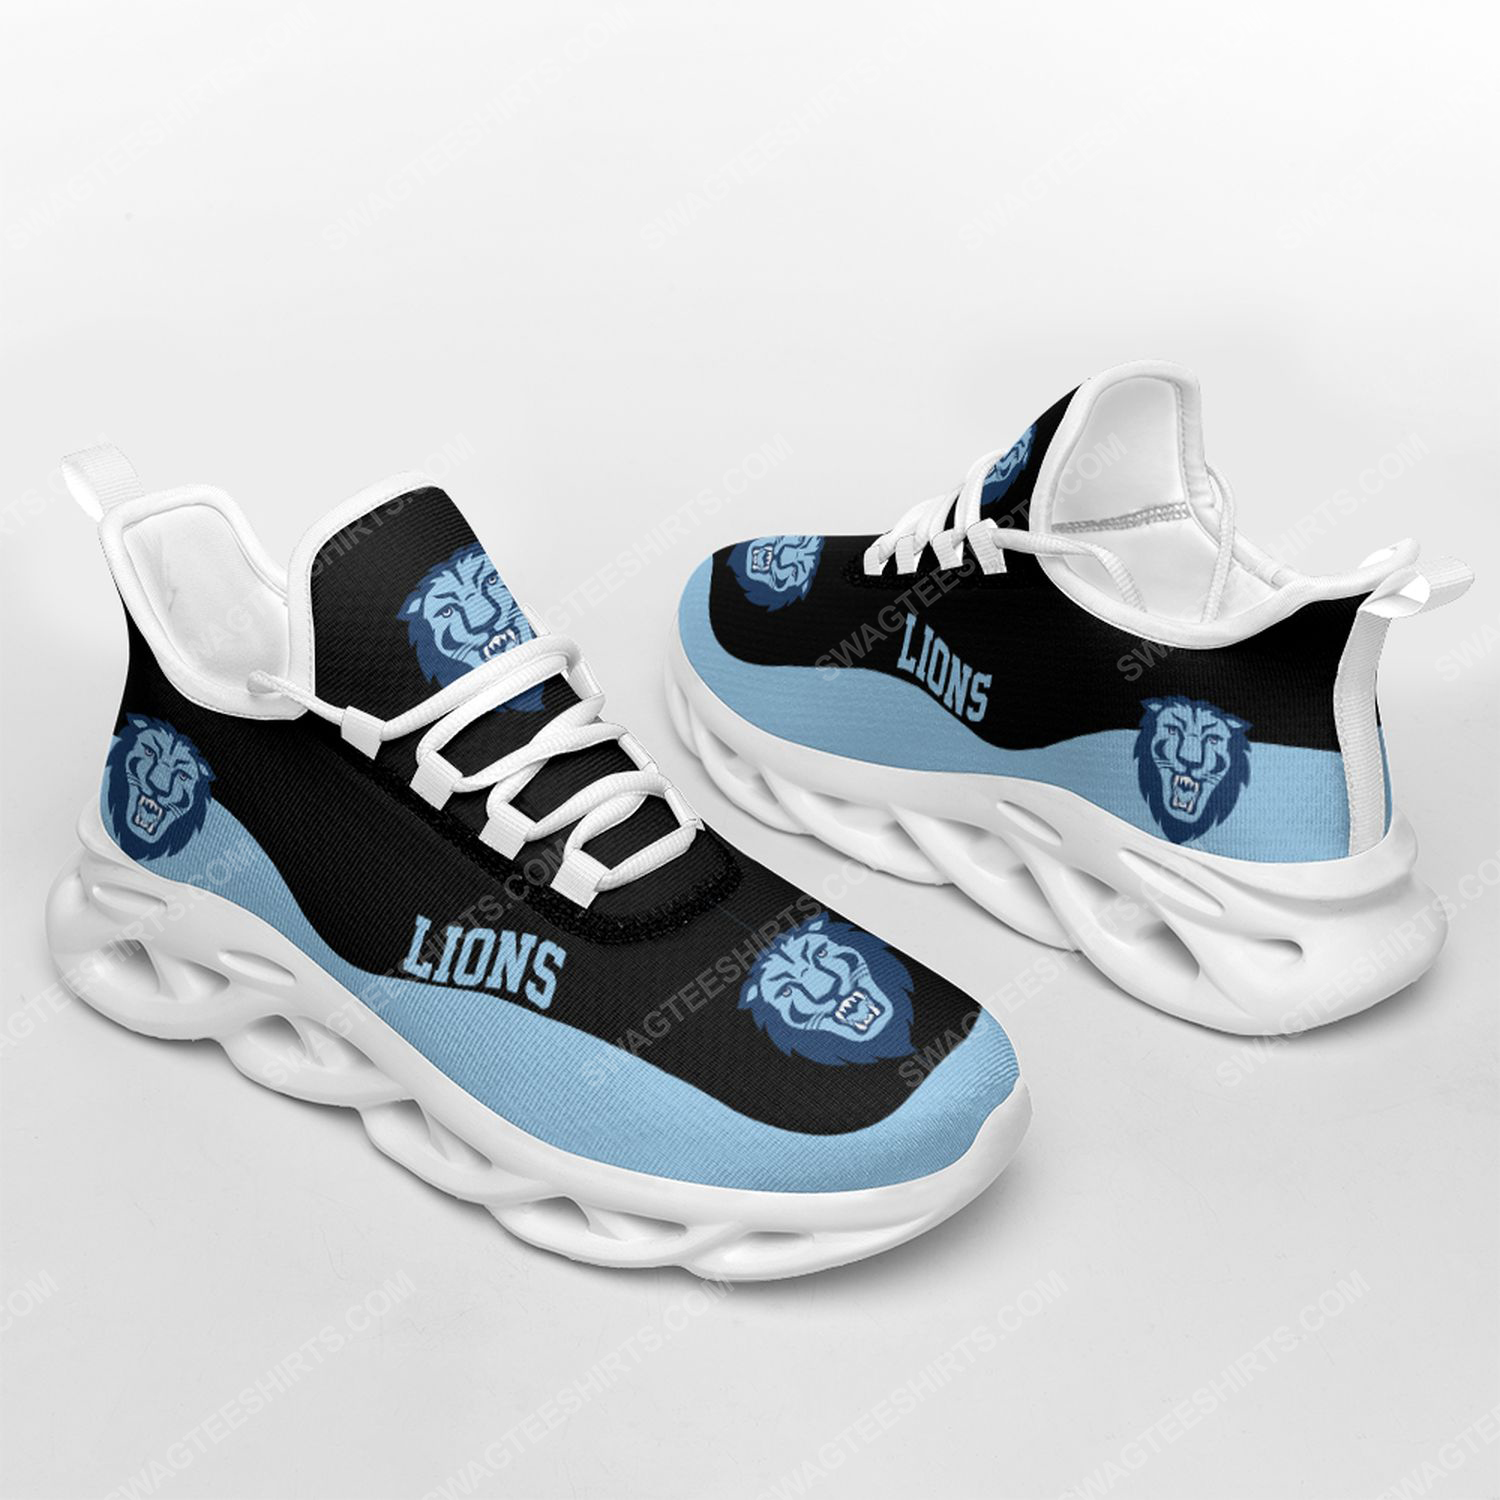 [special edition] The columbia lions football team max soul shoes – Maria